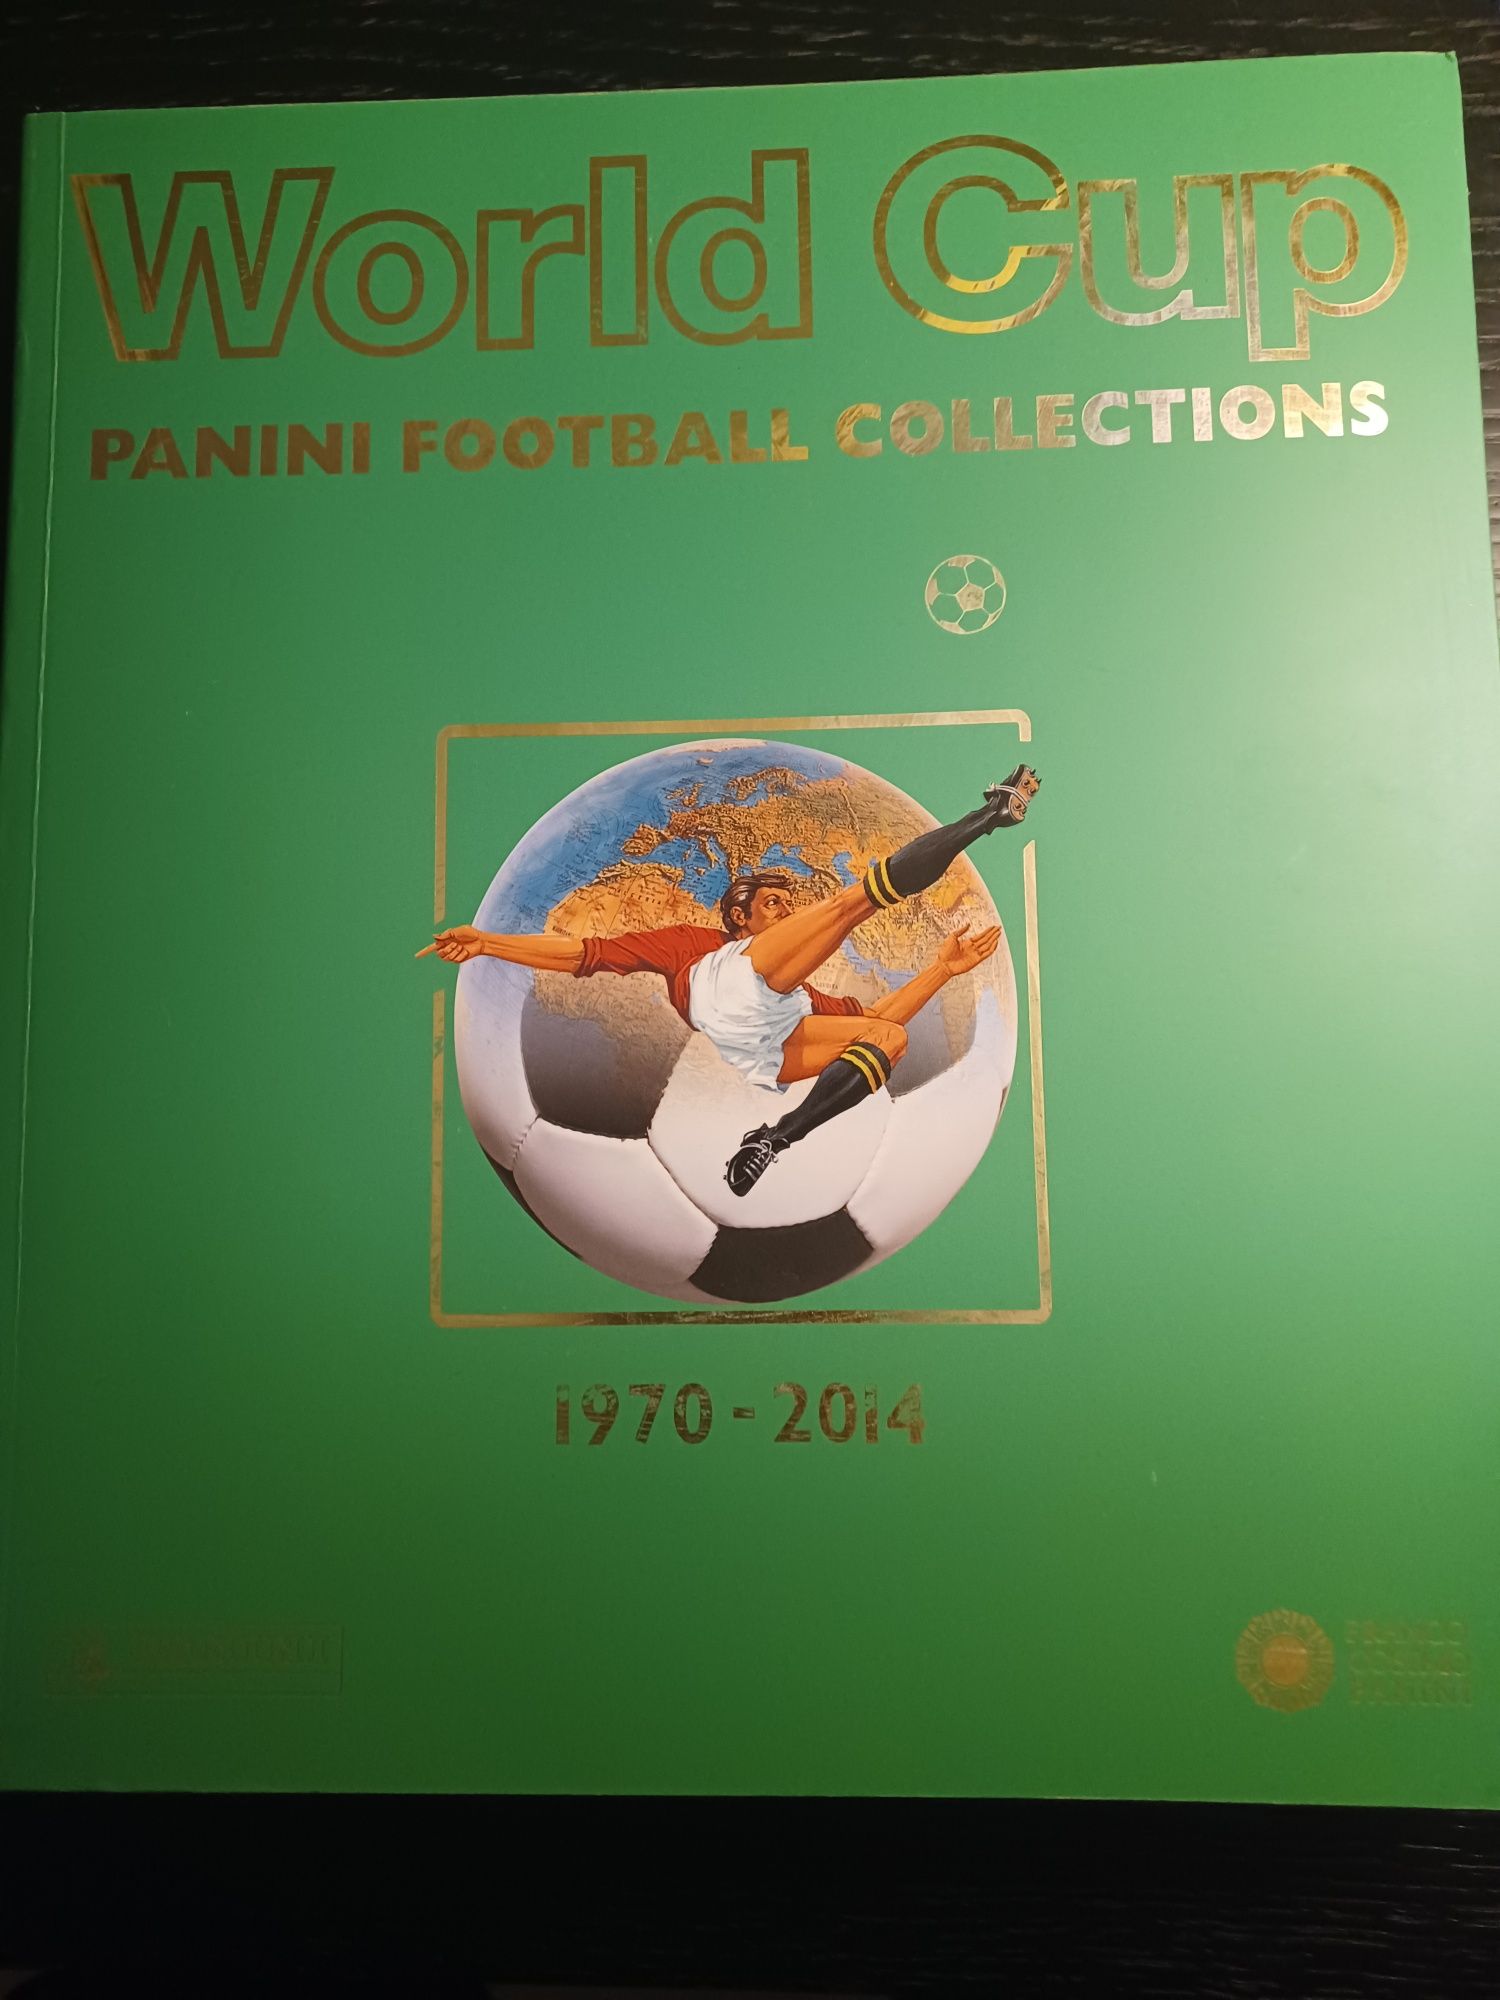 World Cup -Panini Football Collections